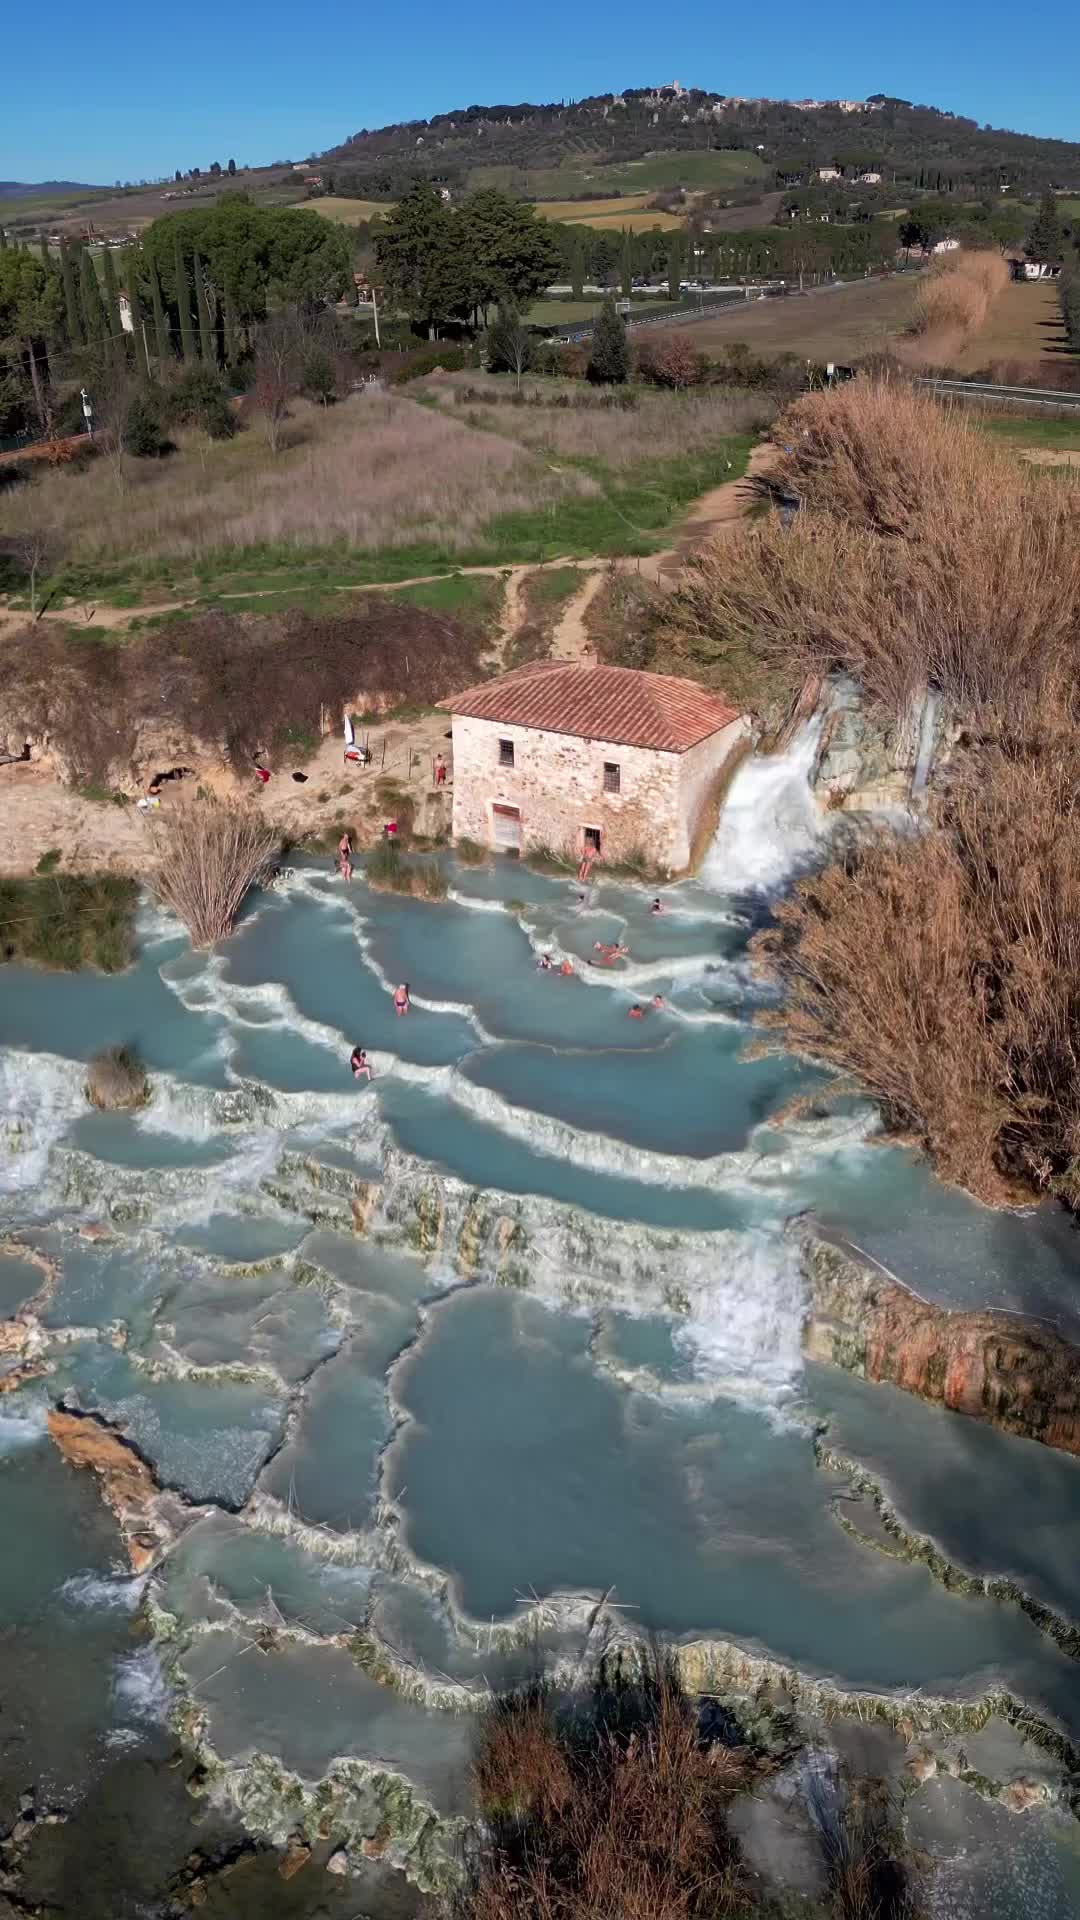 Discover the Natural Hot Springs of Saturnia, Tuscany